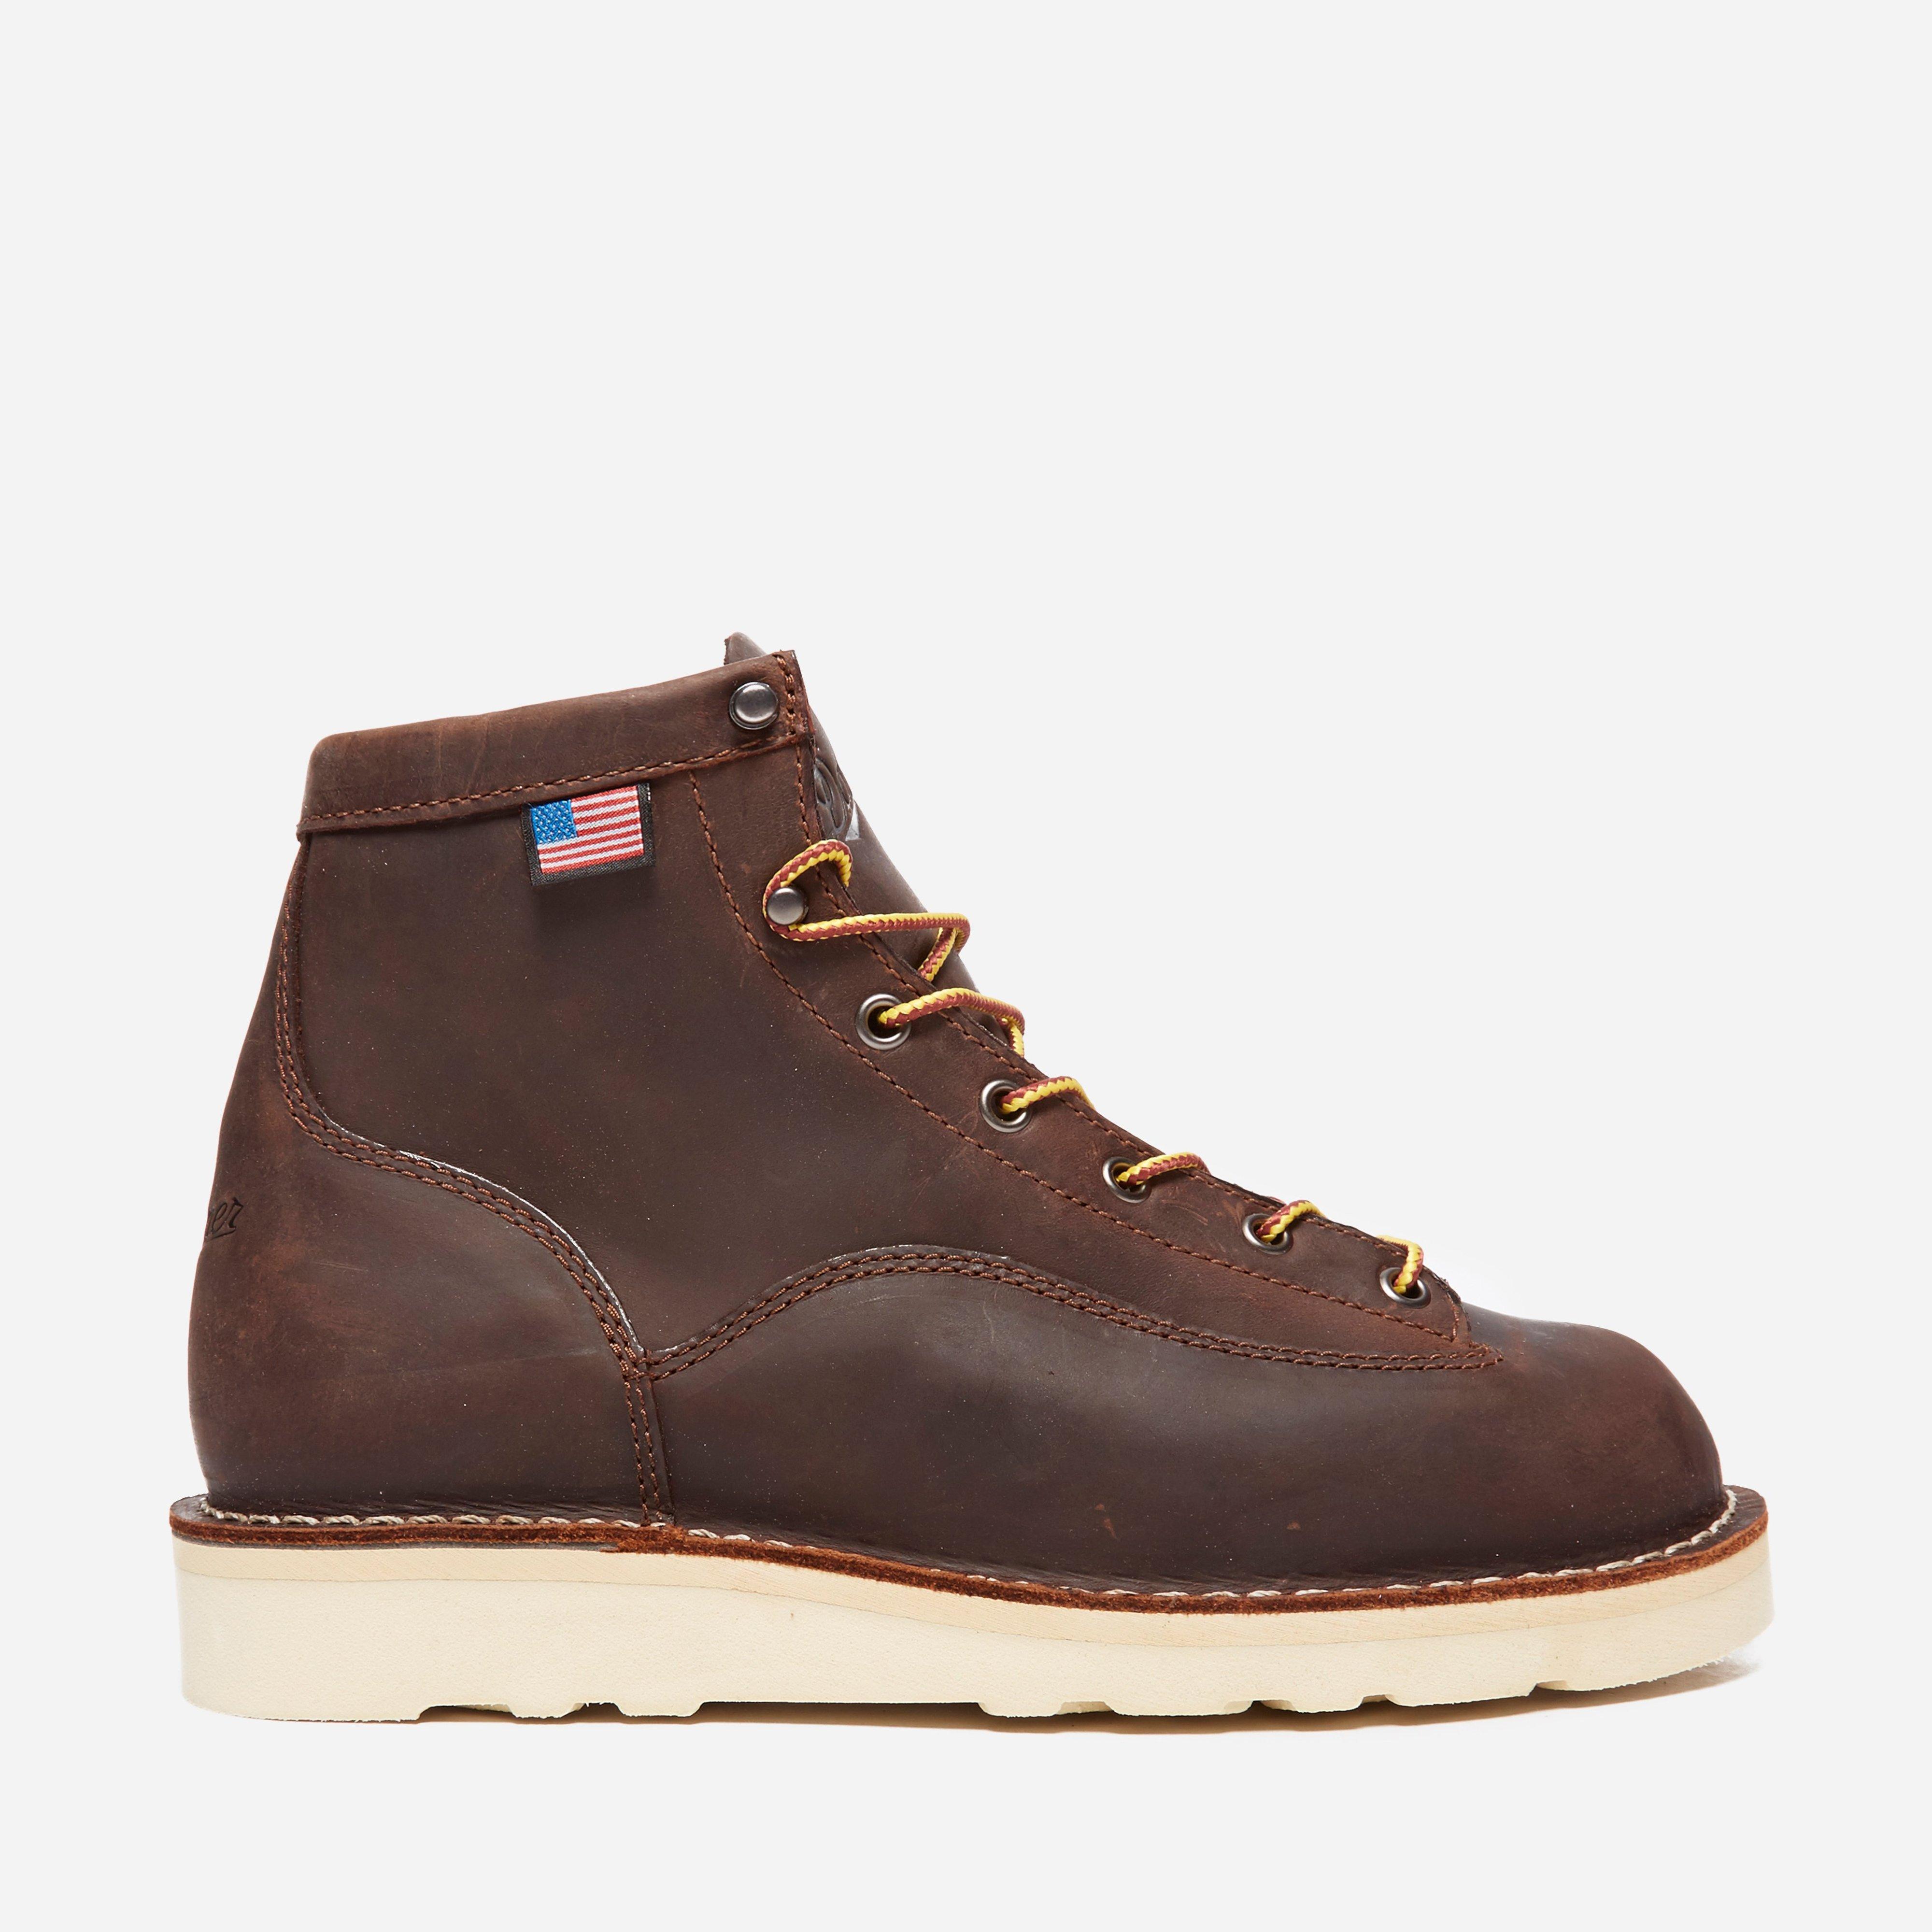 Danner Leather Bull Run Boots in Brown for Men - Lyst